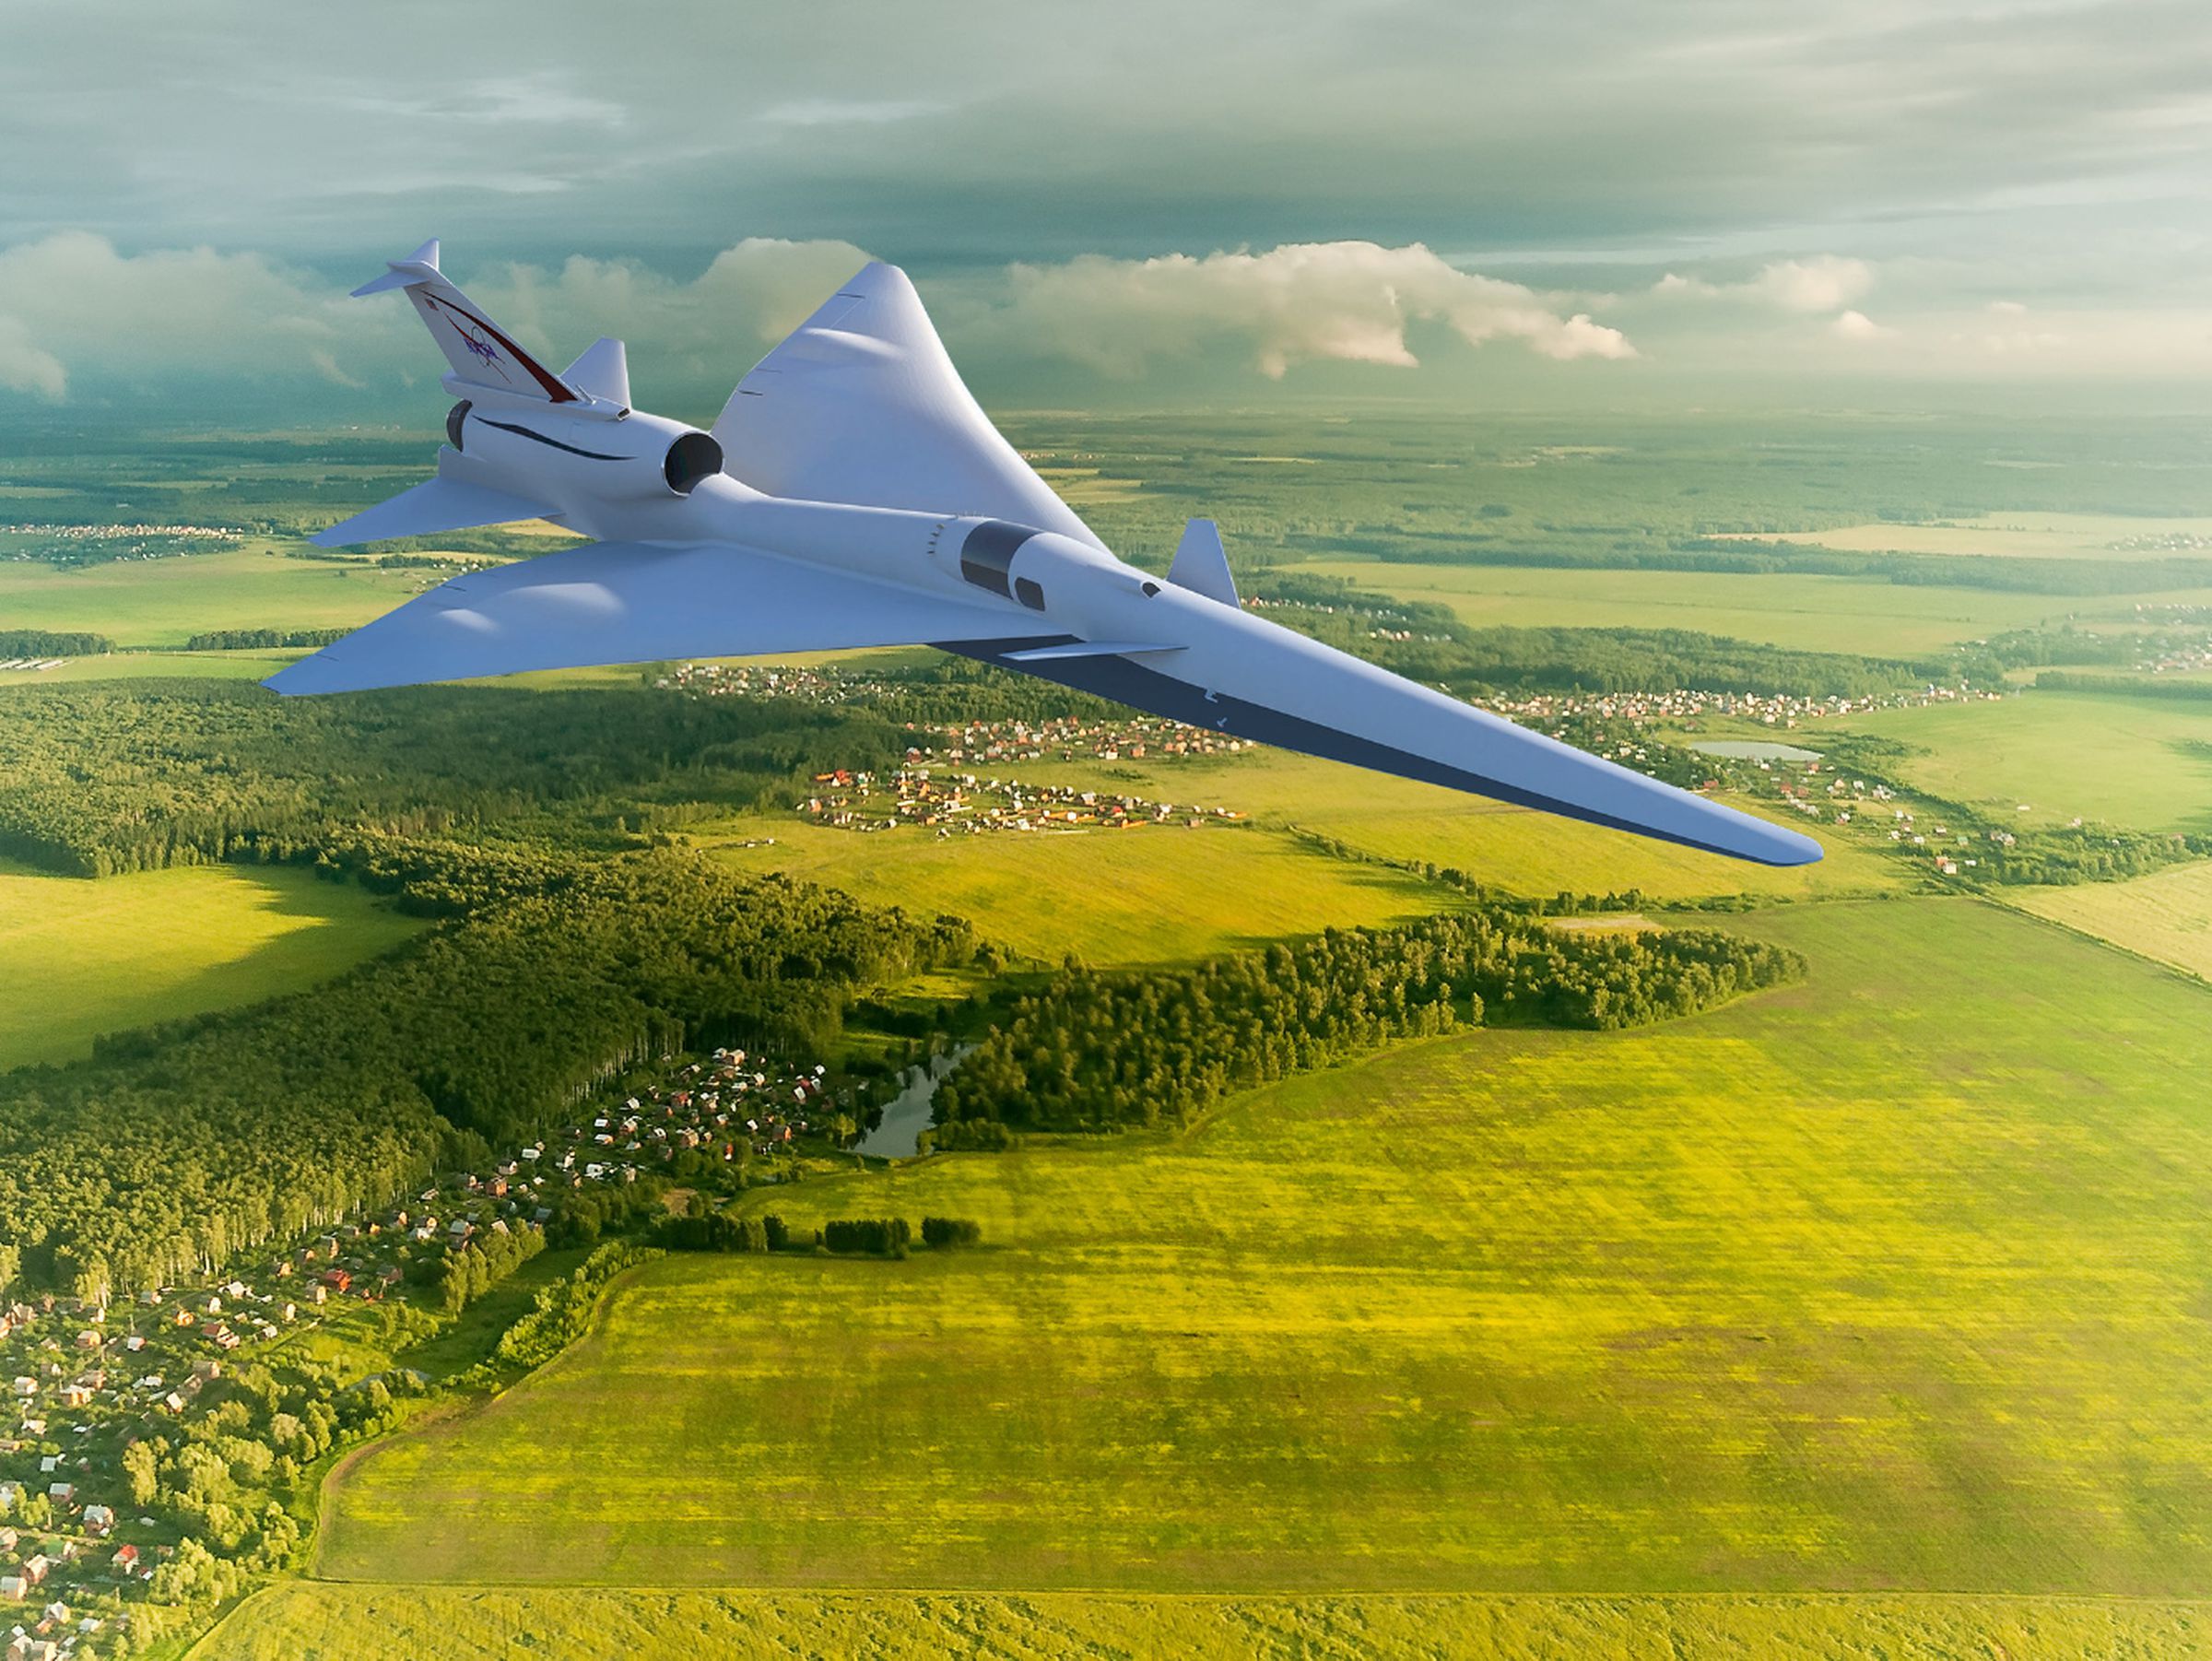 In several years, the X-59 QueSST will test its quiet supersonic technologies by flying over communities in the United States.